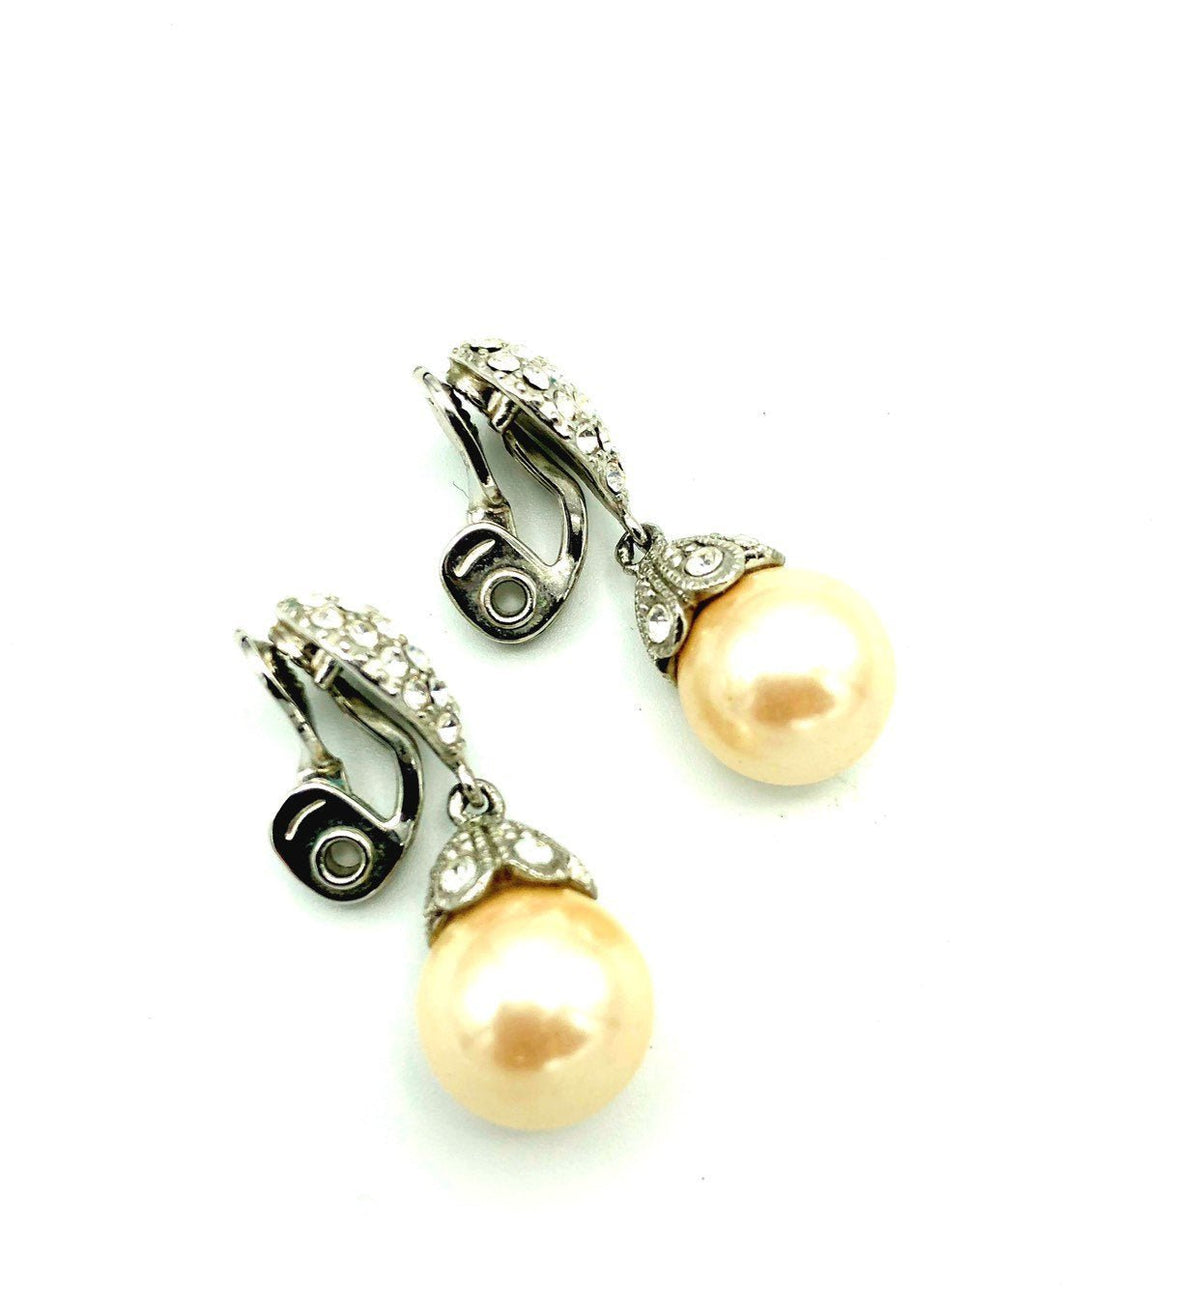 Monet Silver Rhinestone Classic Pearl Drop Art Deco Style Clip-On Earrings - 24 Wishes Vintage Jewelry